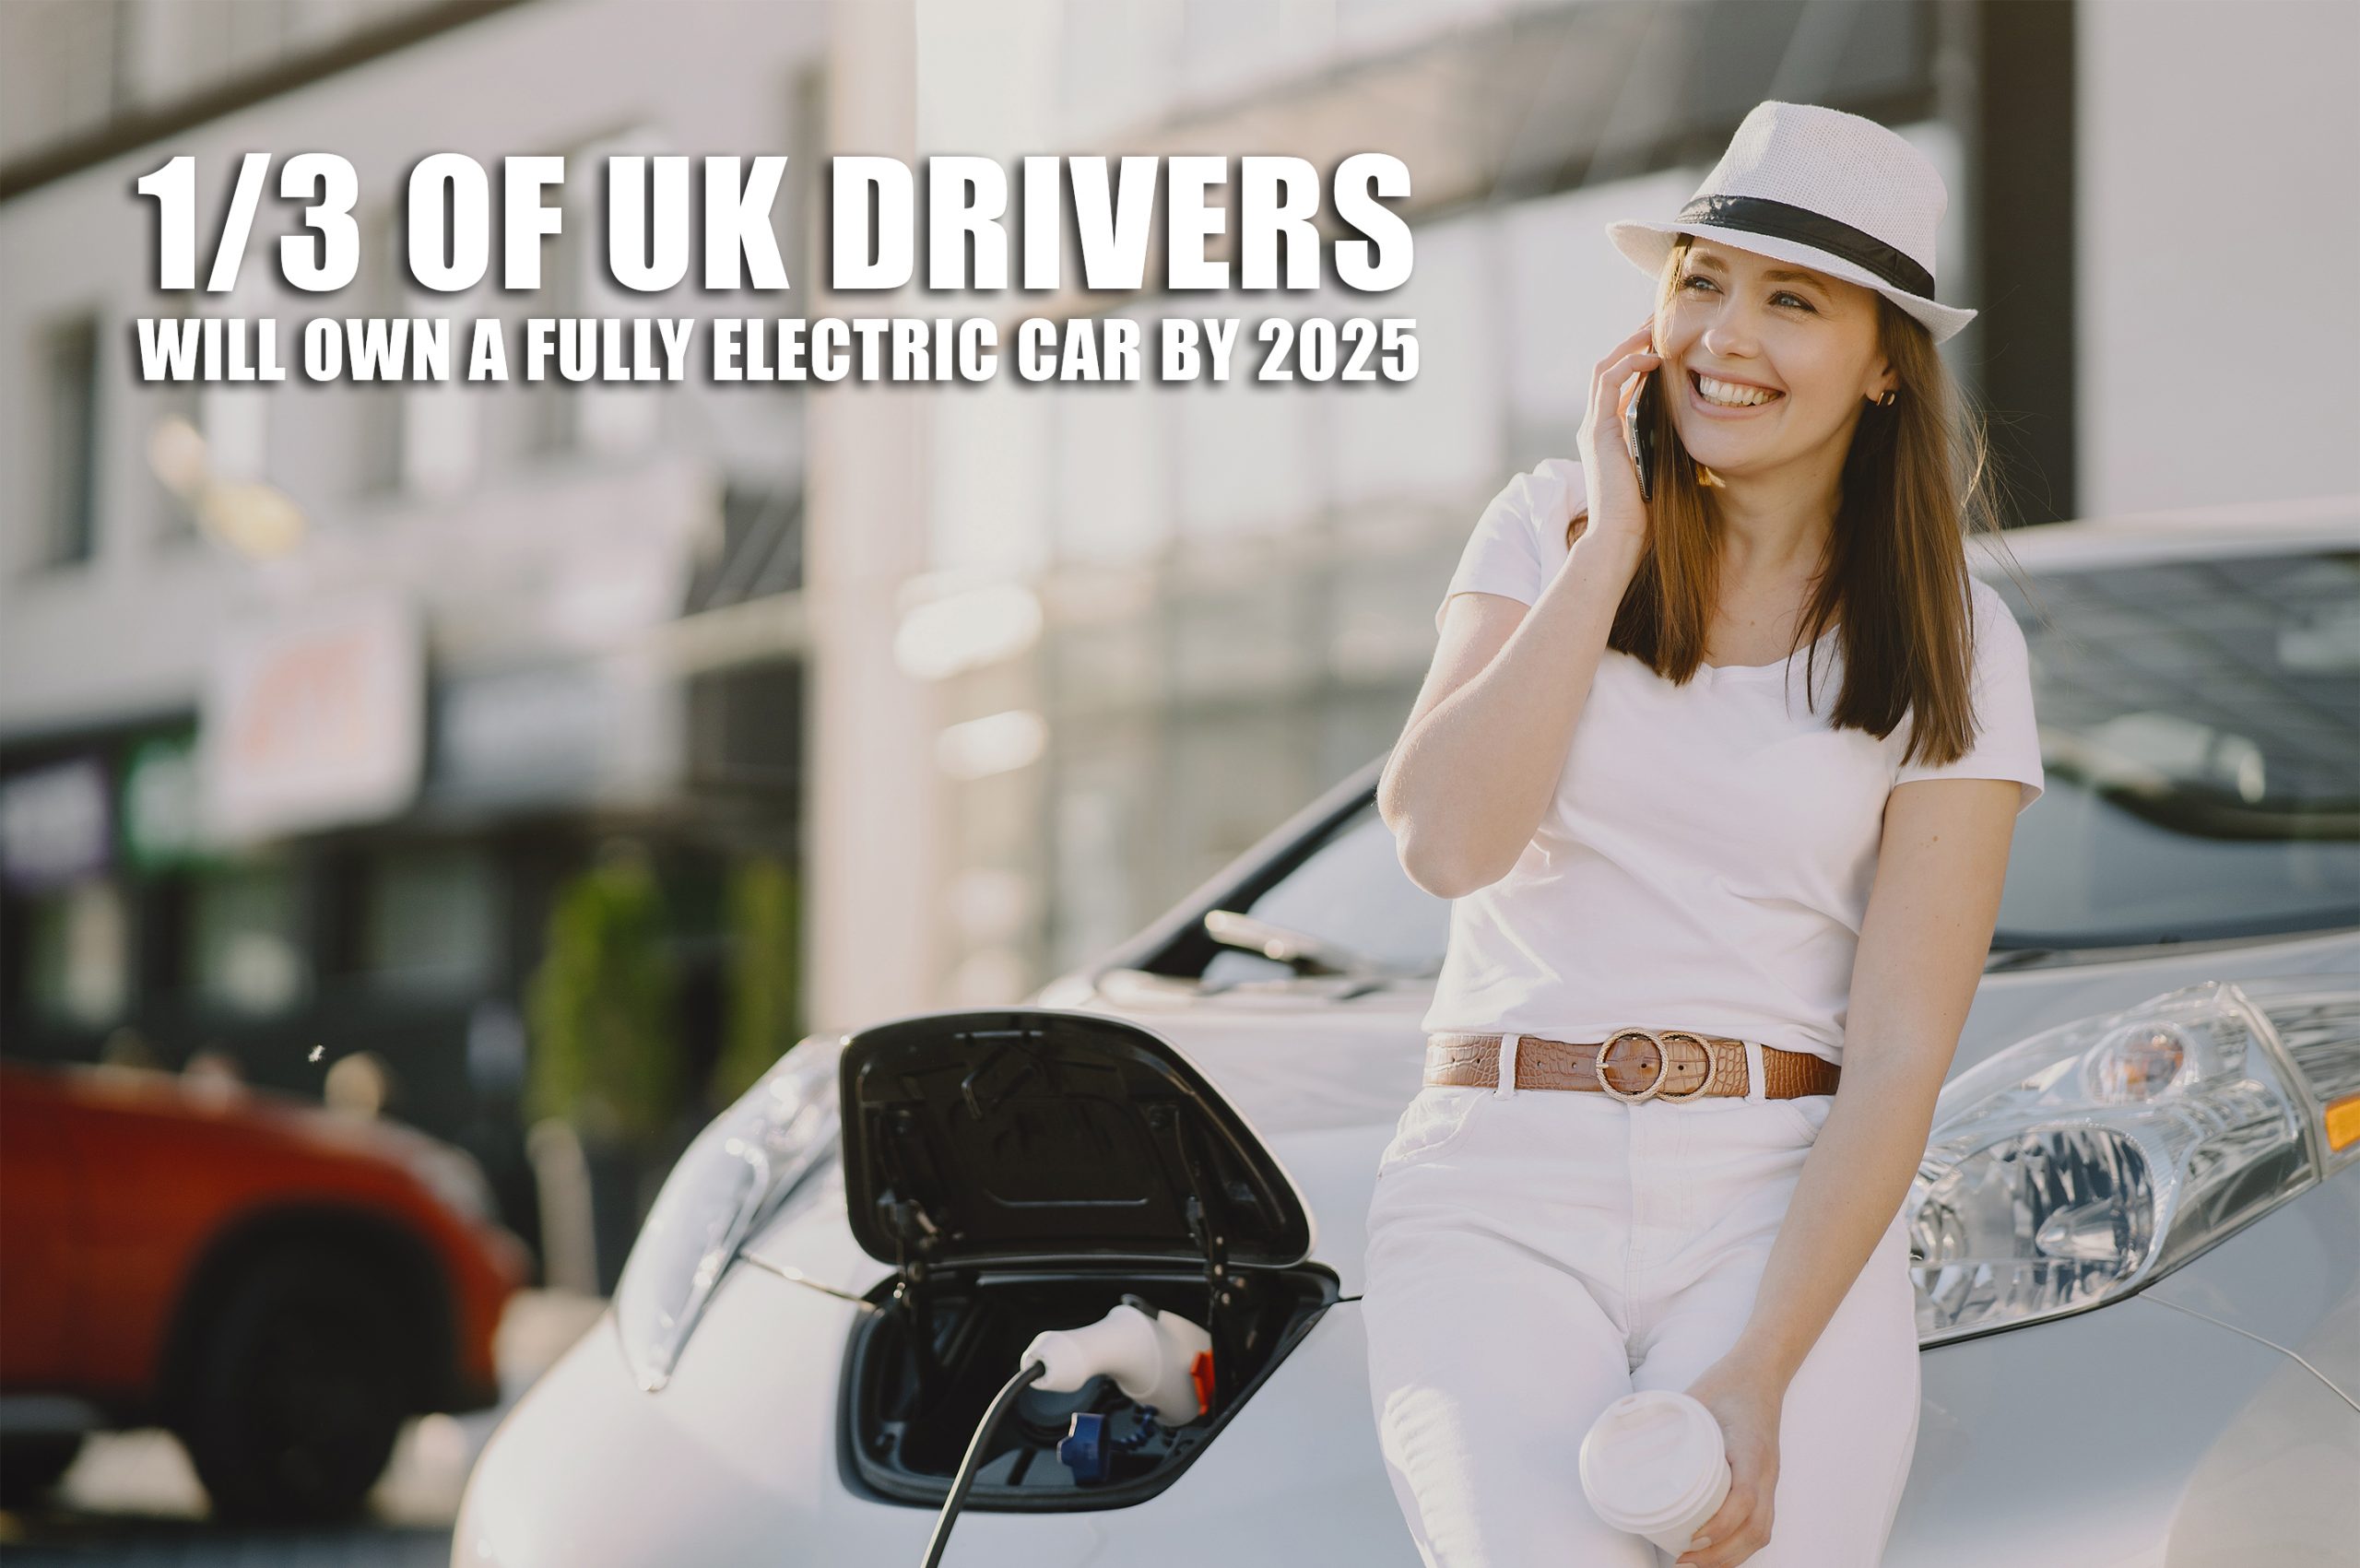 1/3 of UK Drivers will own a fully electric car by 2025